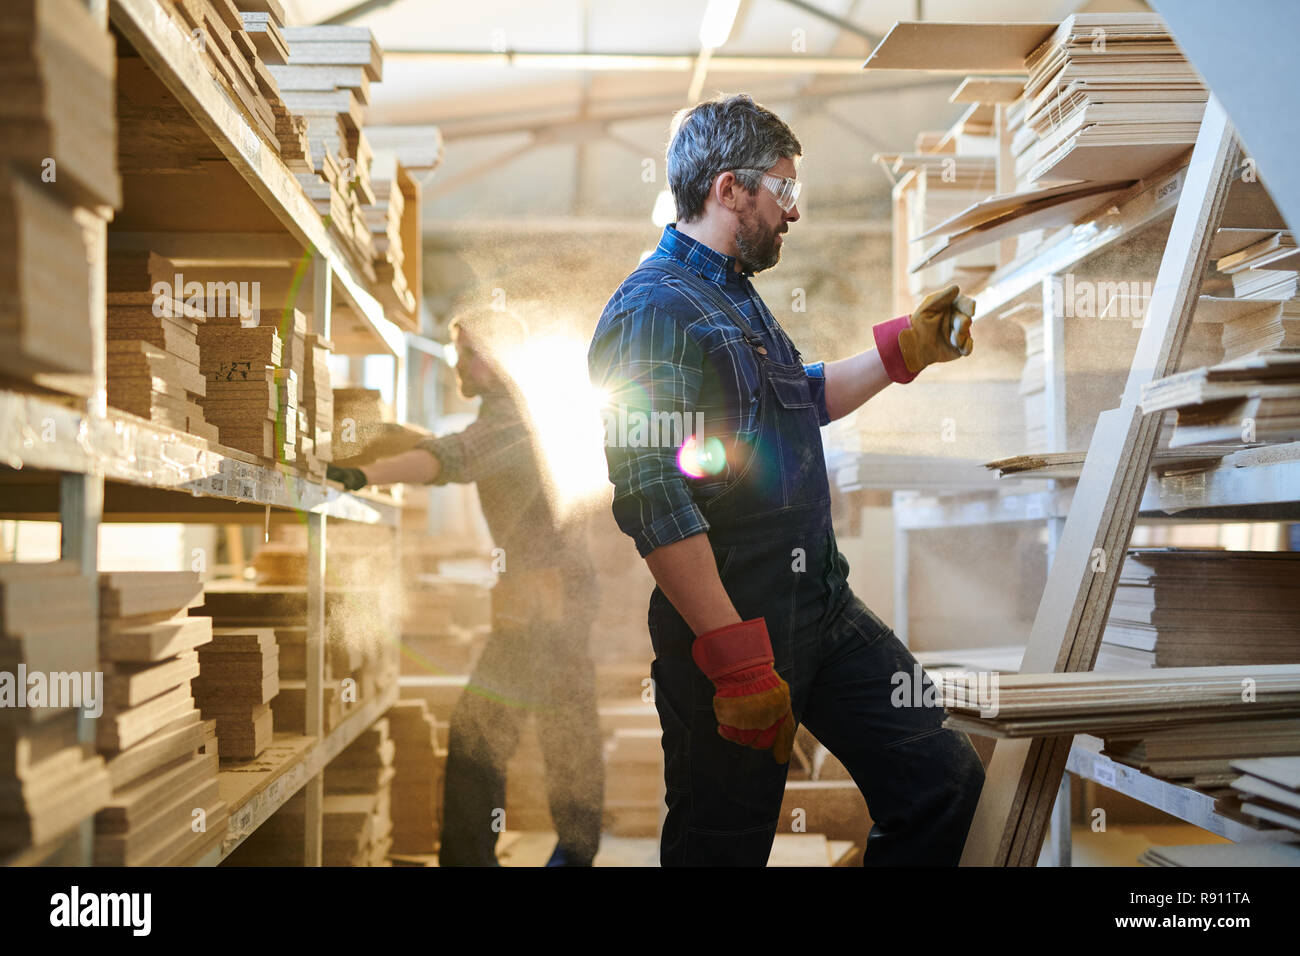 Serious furniture worker finding detail at warehouse Stock Photo